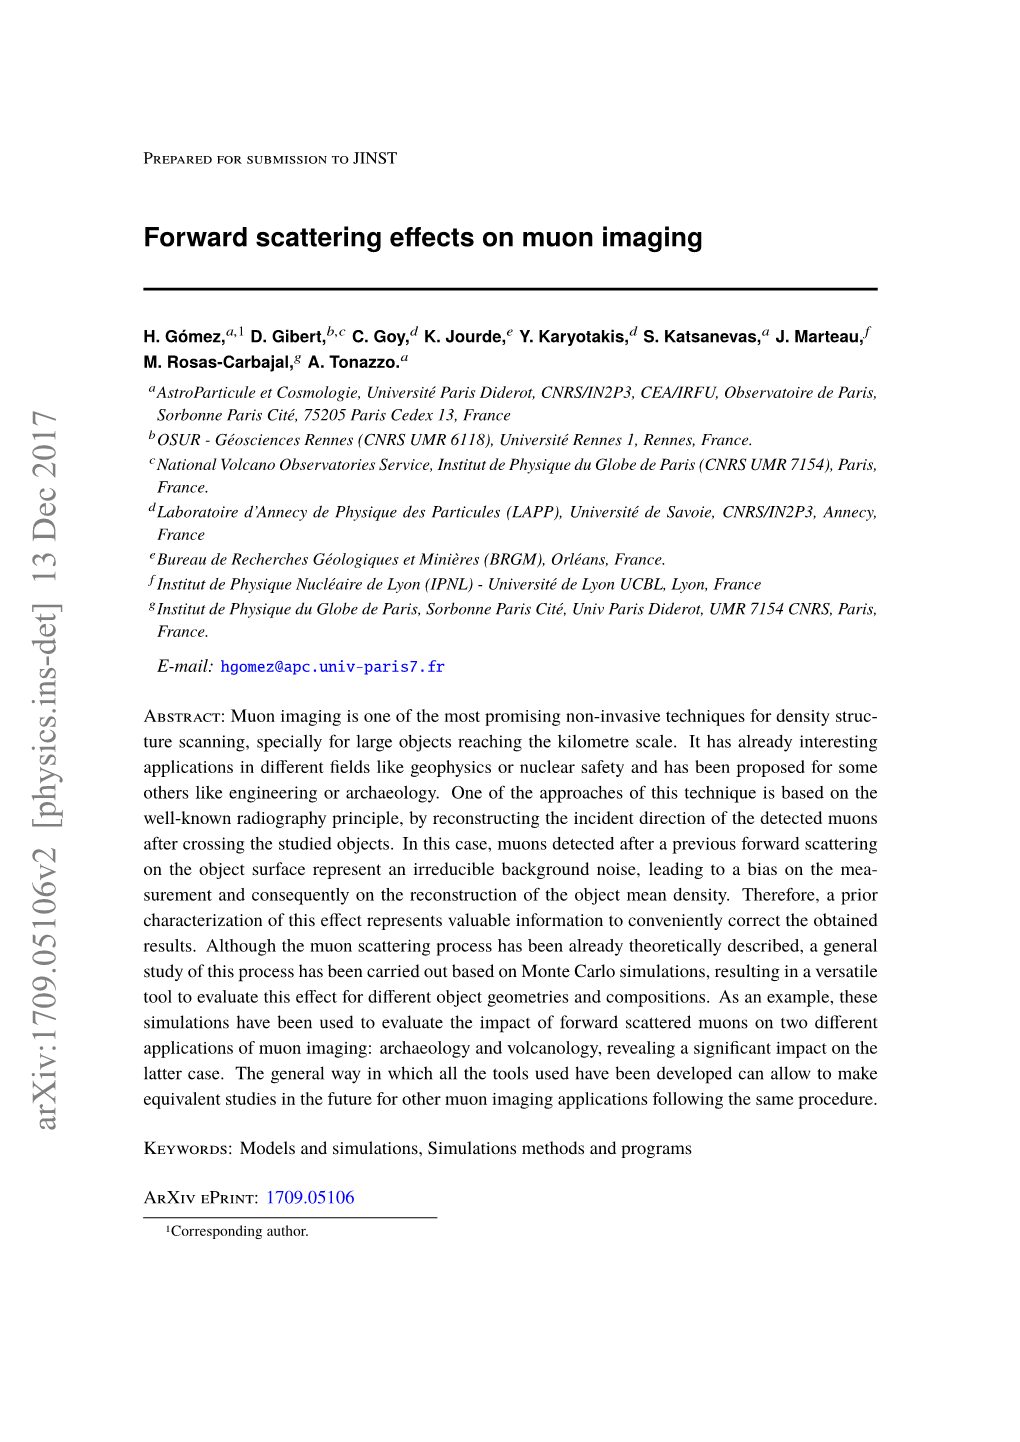 Forward Scattering Effects on Muon Imaging